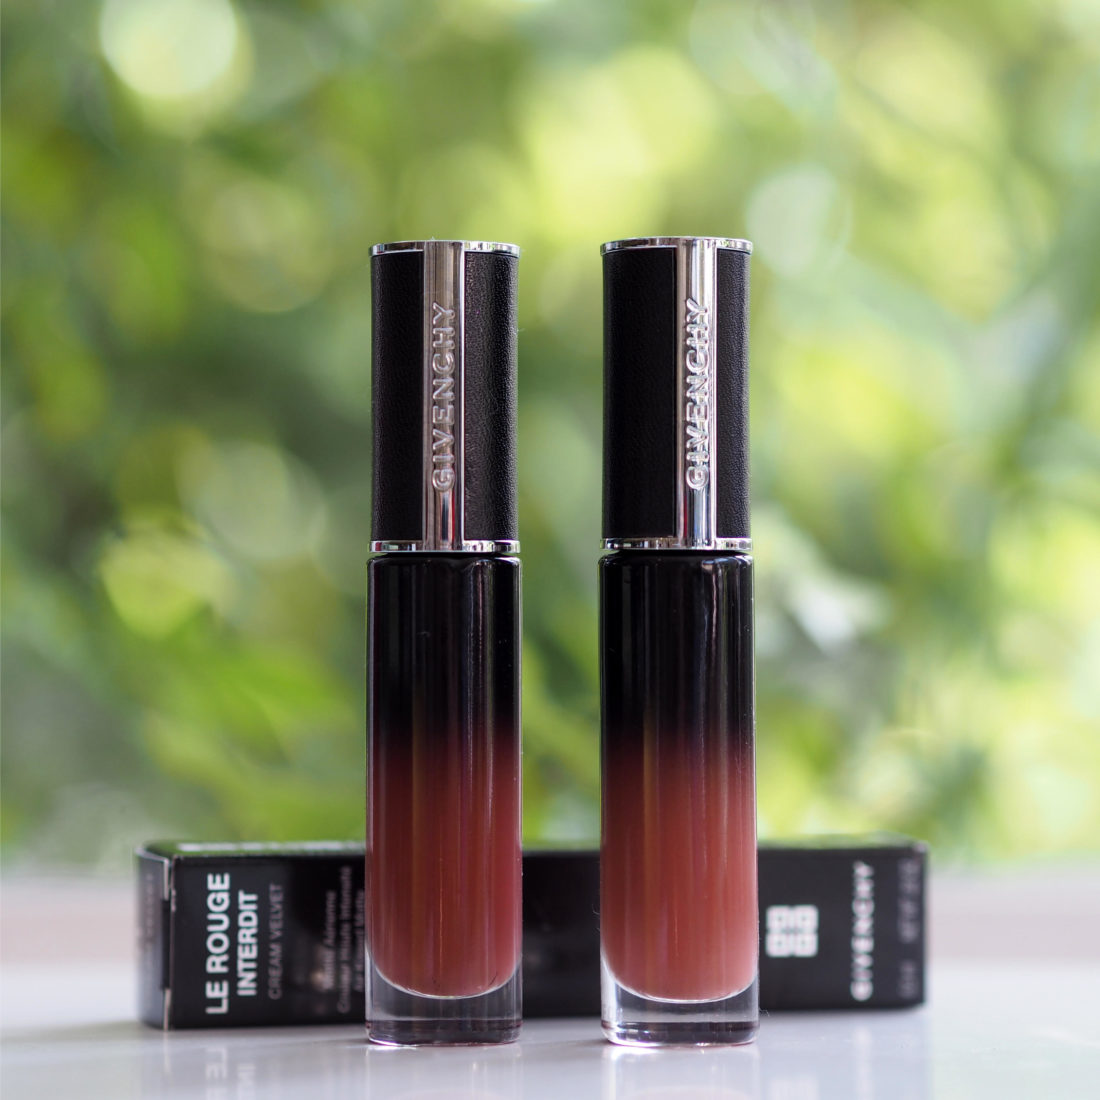 Givenchy Very Irresistible Collection Review - Escentual's Blog